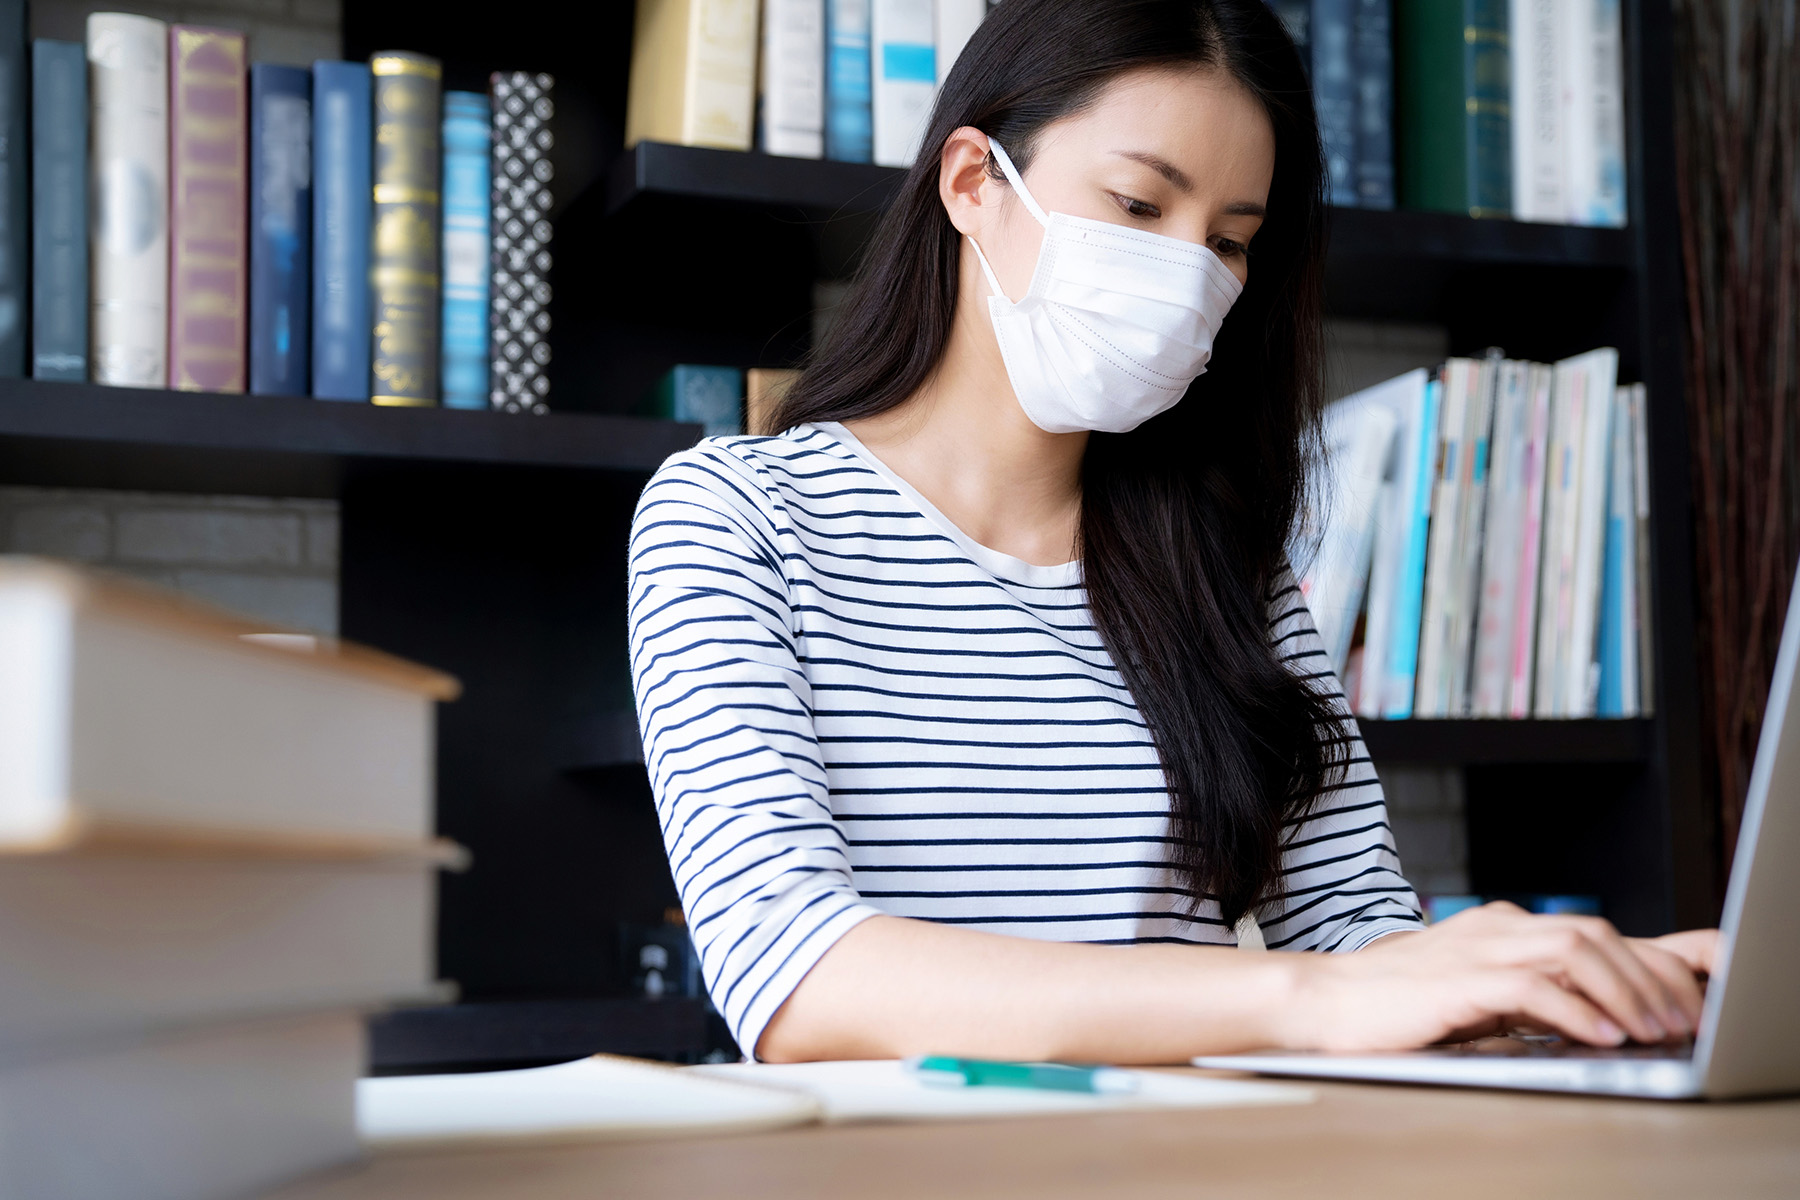 A woman wearing a face mask uses a computer at the library. Photo: iStock